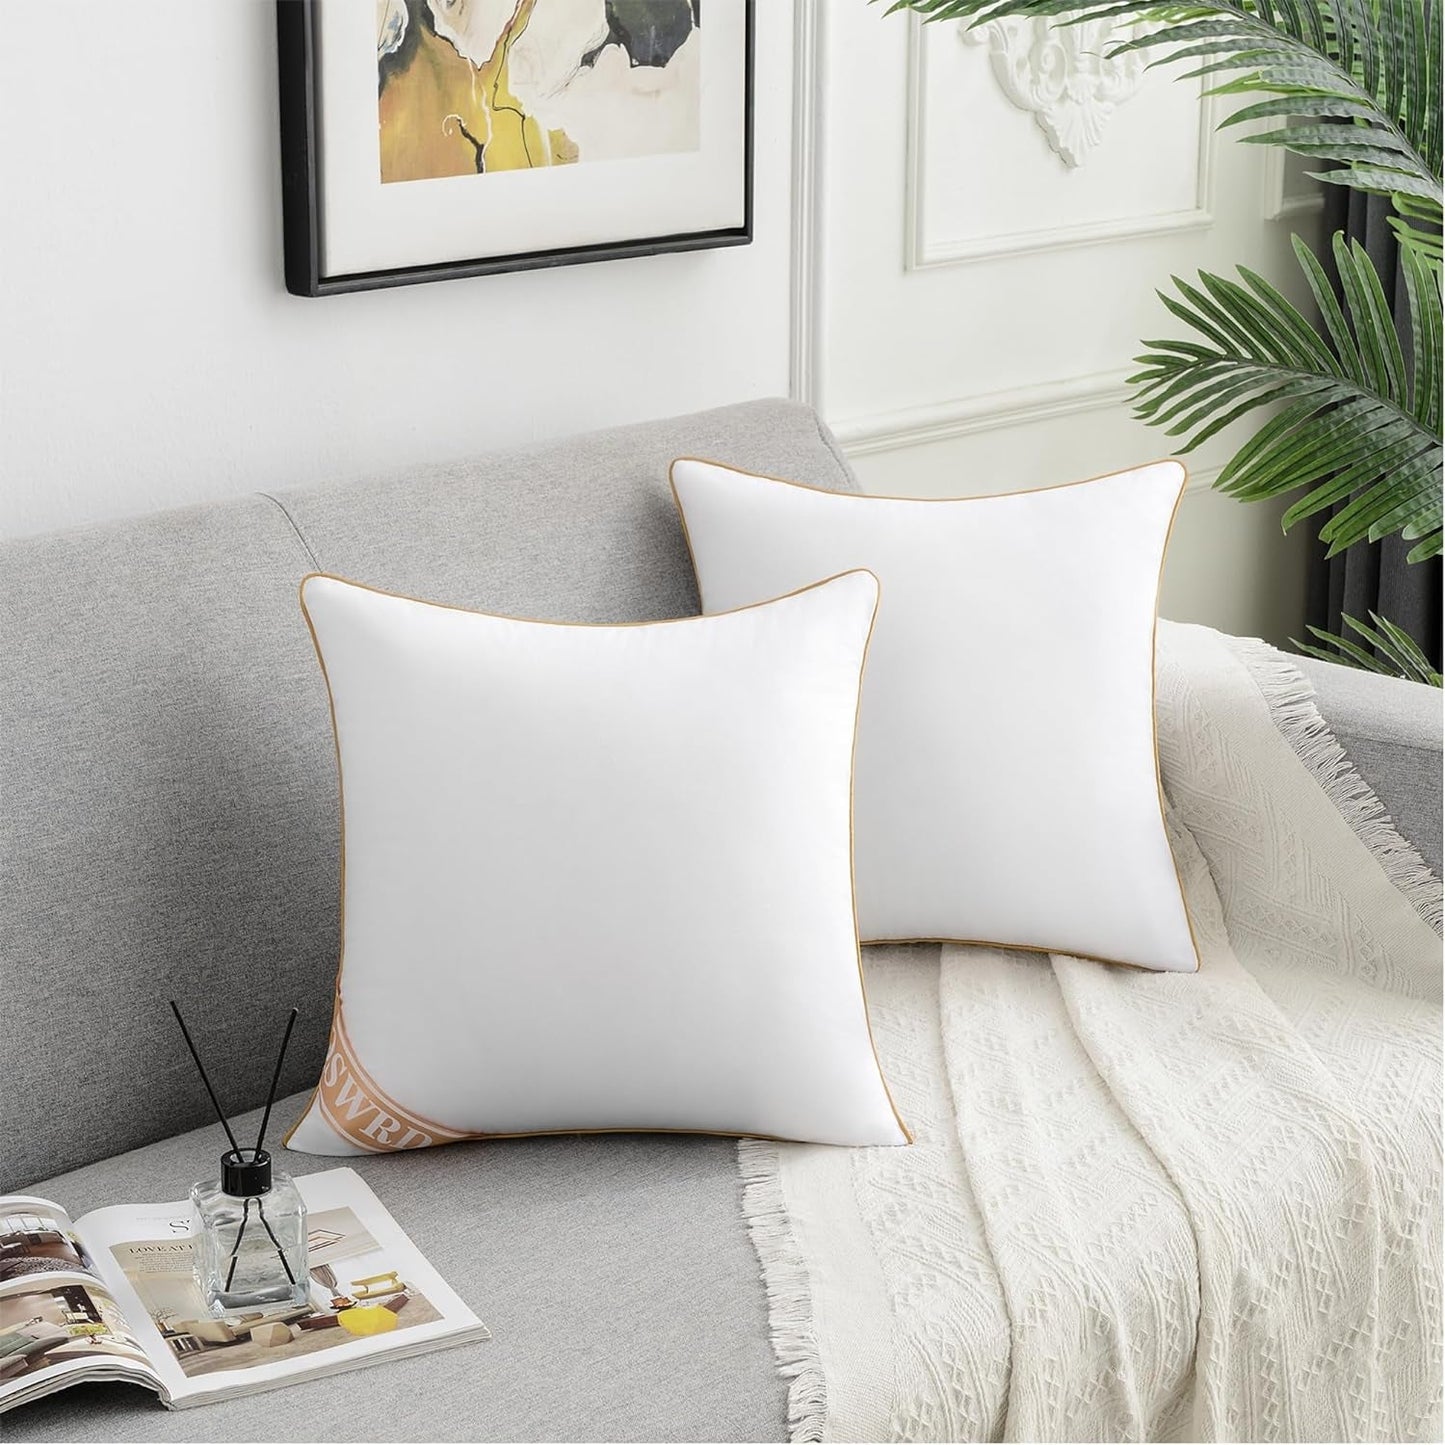 18" X 18" Pillow Insert Set of 2 Square Forms Interior Sofa Throw Pillow Inserts with 100% Cotton Cover 18 Inch Decorative Bed Pillows Insert White Couch Cushions Indoor